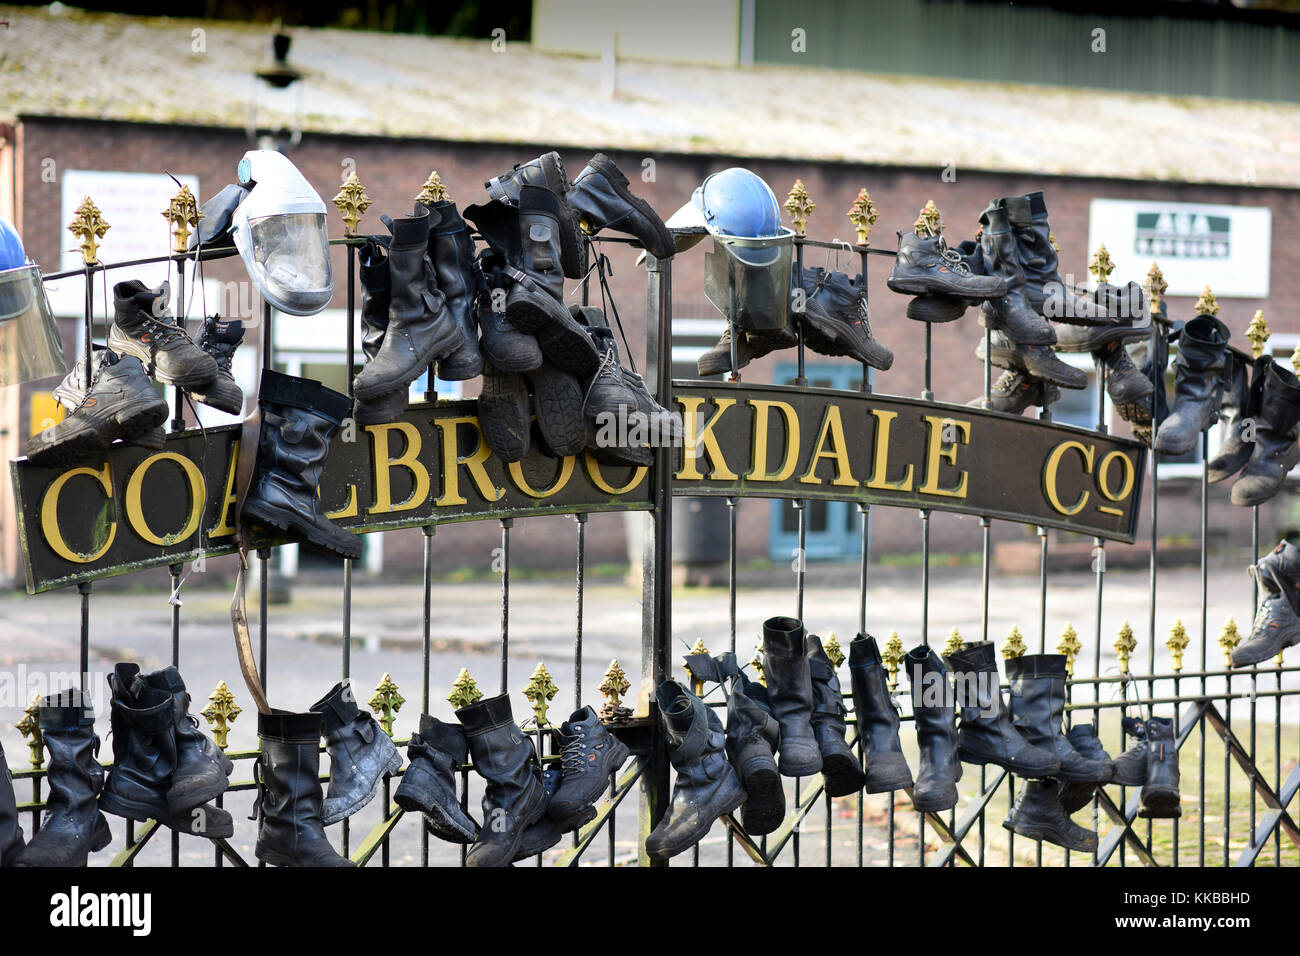 Over 300 years of history ends with the closure of the Coalbrookdale foundry. Redundant workers hang up their boots in a symbolic gesture. Picture Dave Bagnall Stock Photo